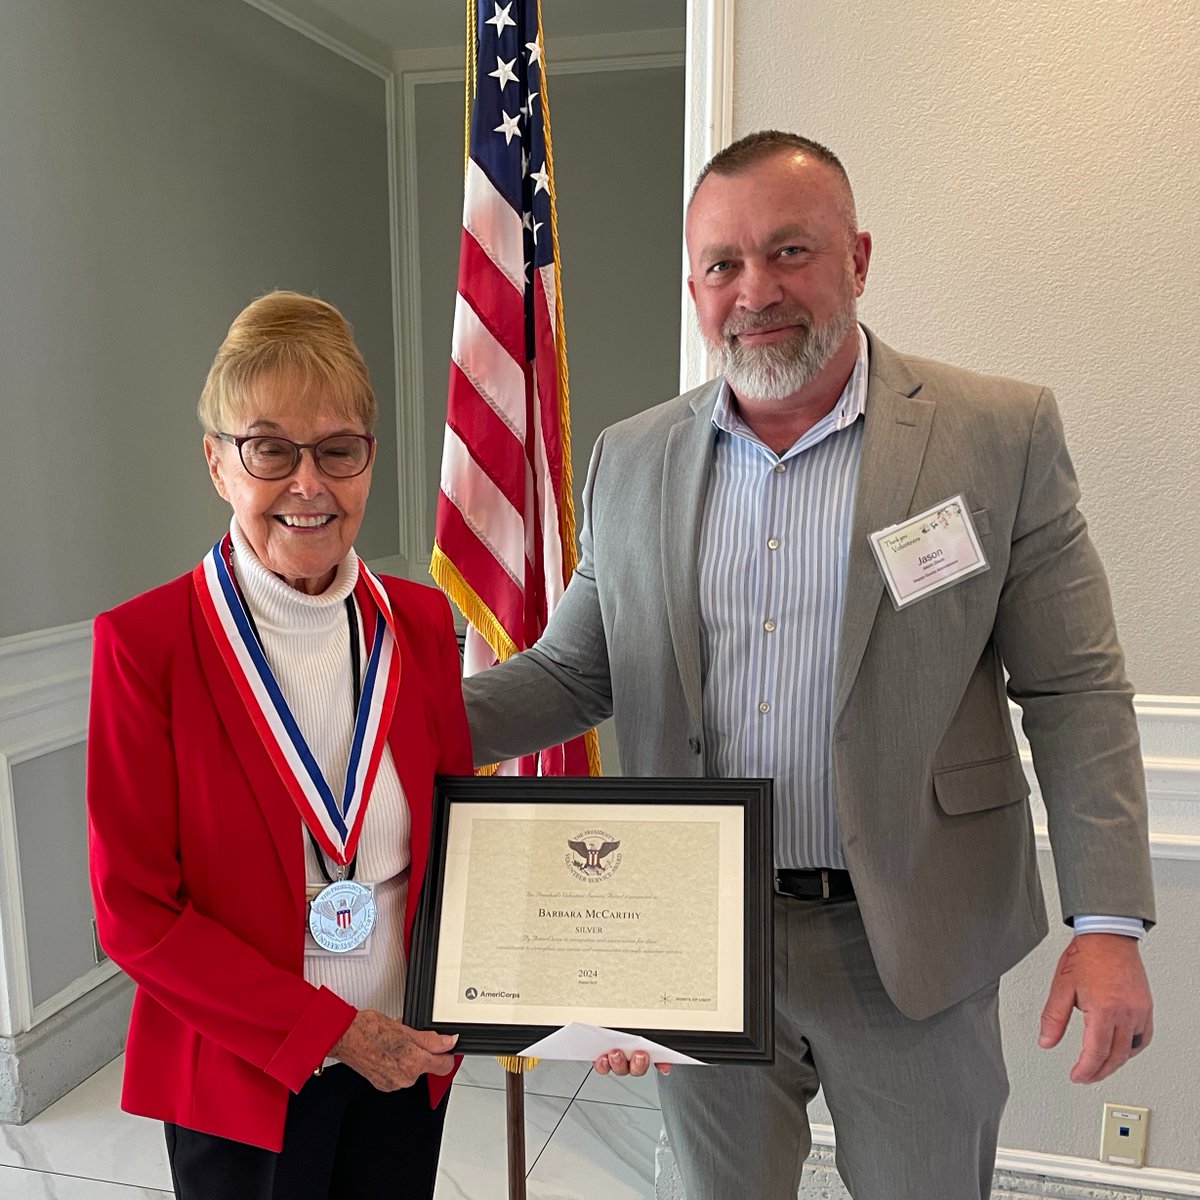 St. Lucie County Deputy Administrator Jason Davis presents resident Barbara McCarthy with the President’s Silver Volunteer Service Award for the 403 hours of volunteer work she contributed to the Morningside Branch Library. #volunteers #volutneerappreciationmonth